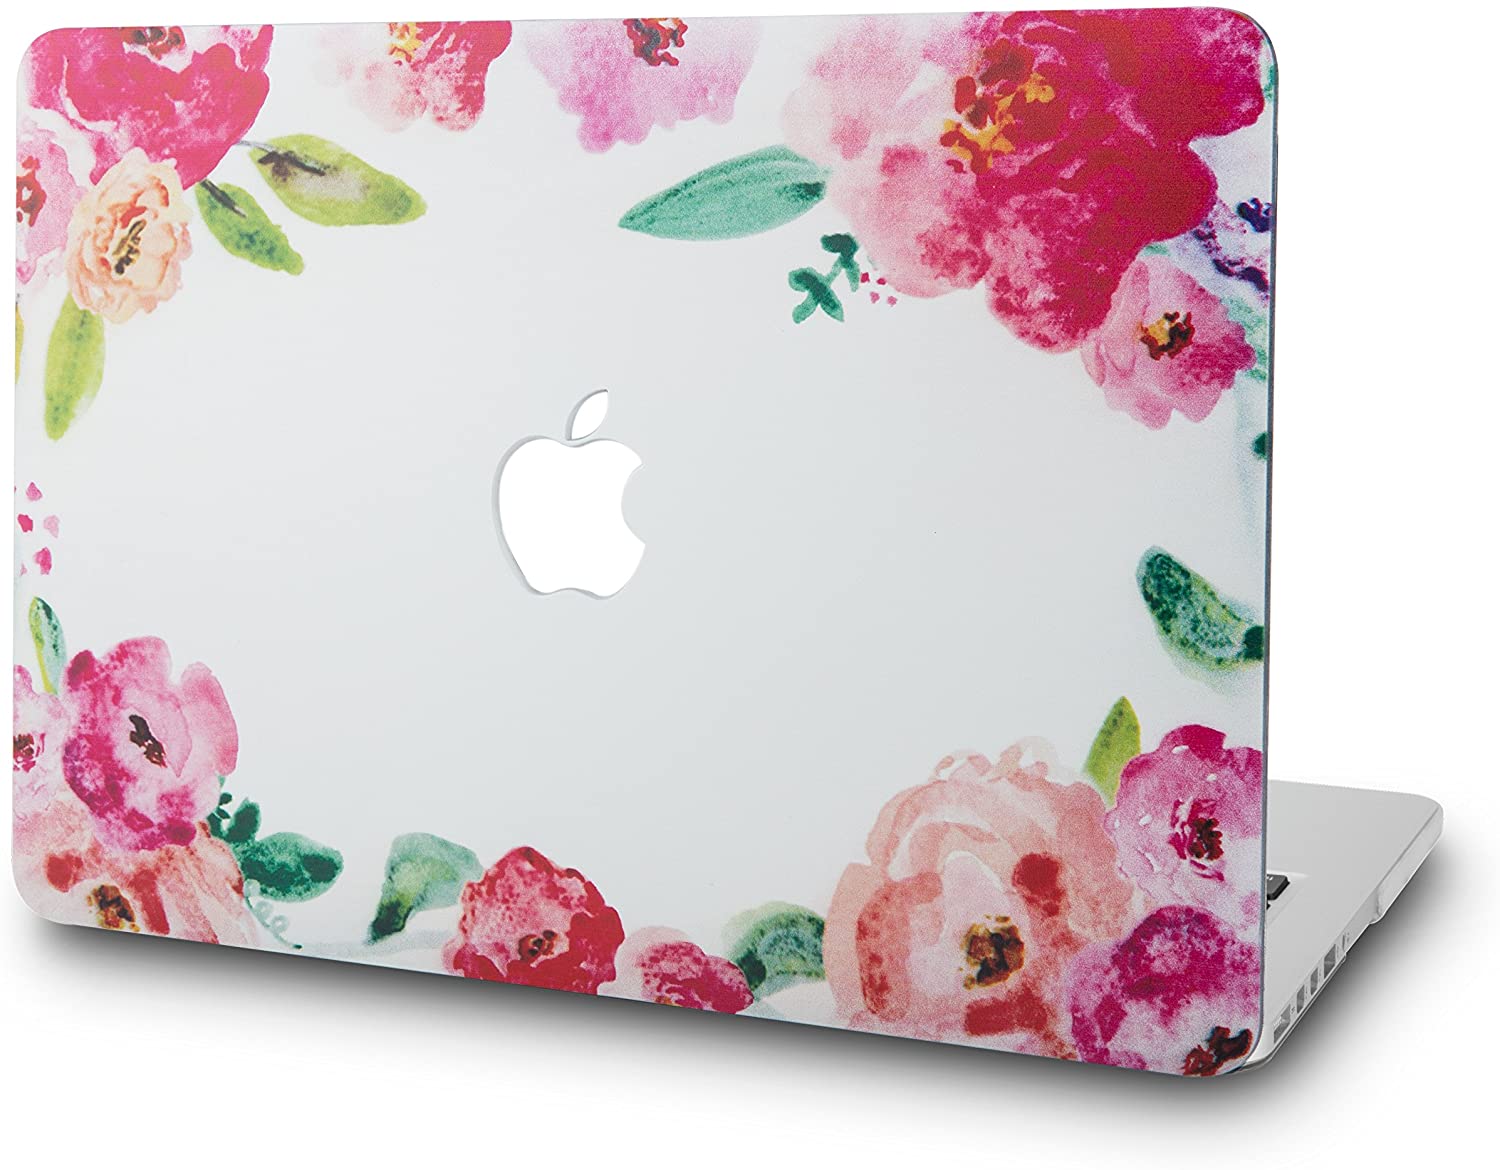 Flower -  MacBook Air 13 inch Case 2009 - 2017 Release. Hard case only - e4cents